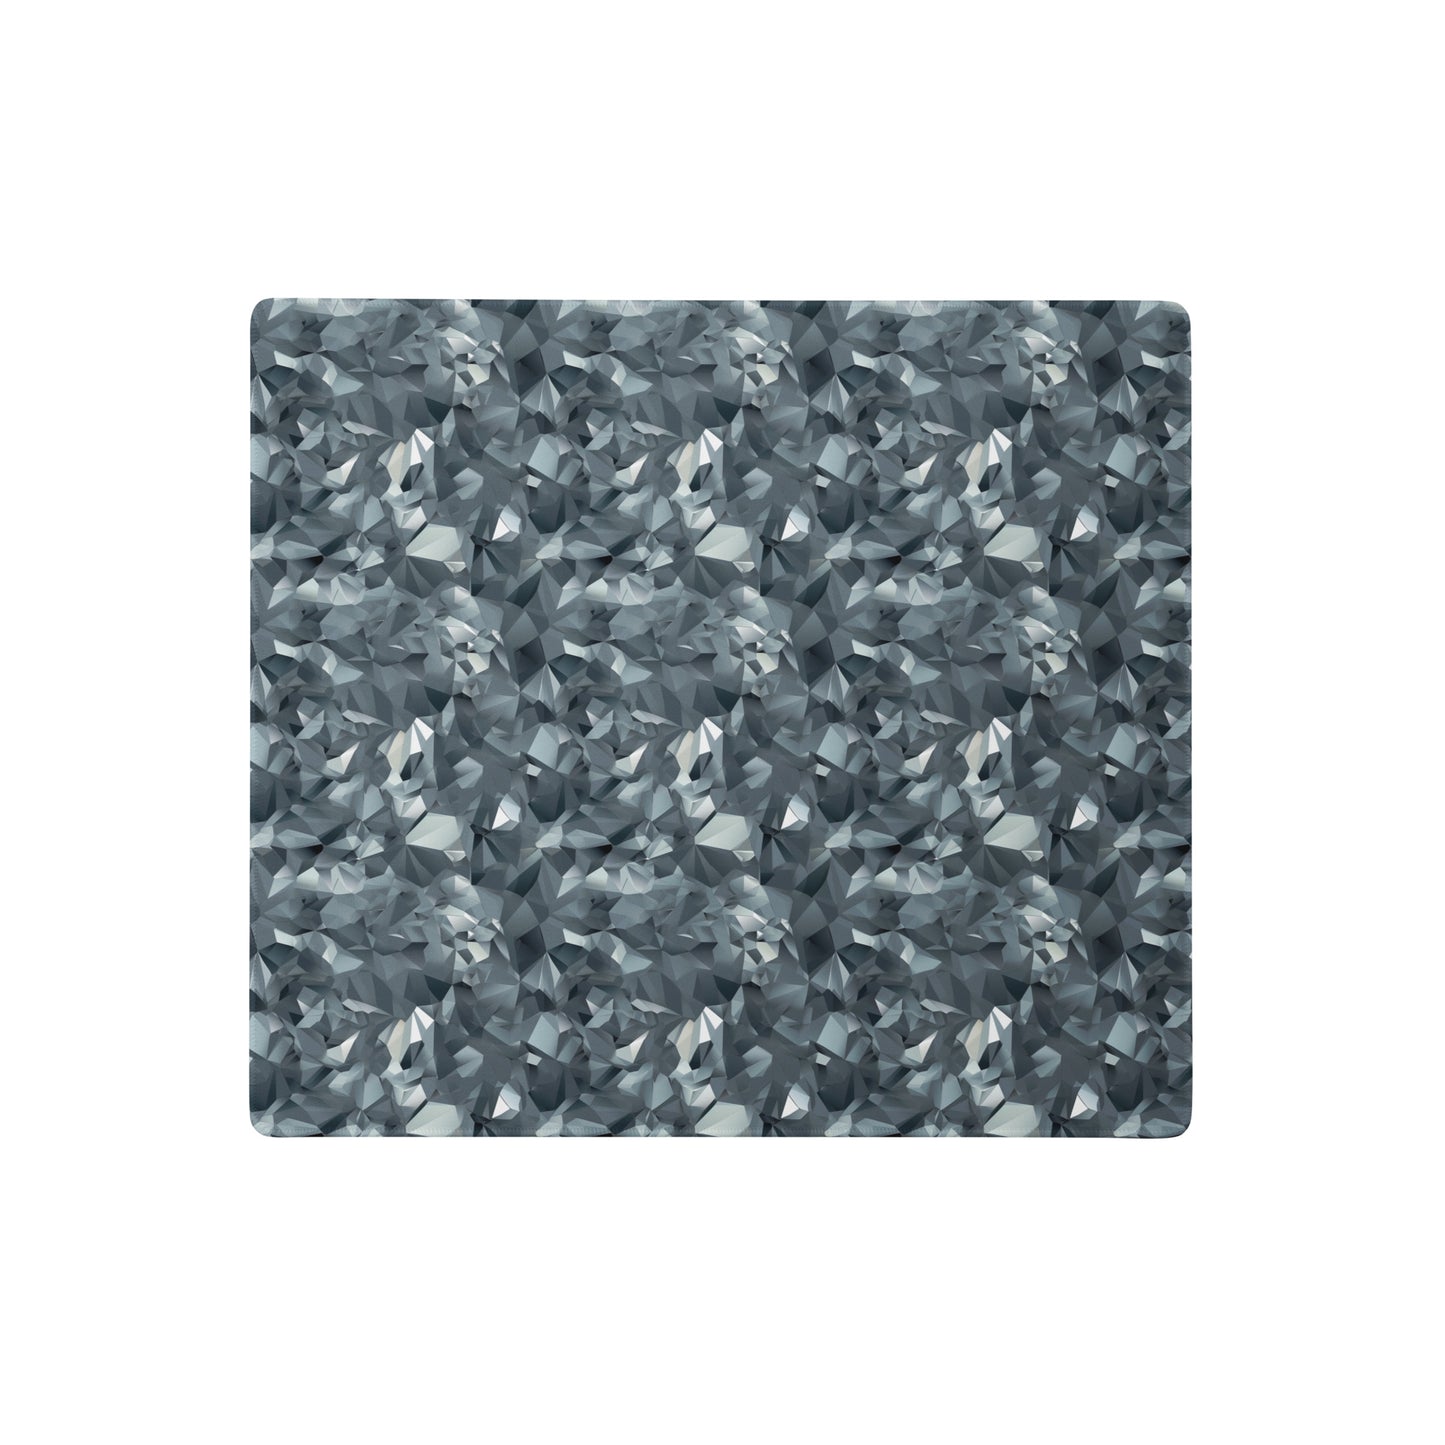 An 18" x 16" gaming desk pad with gray crystals.